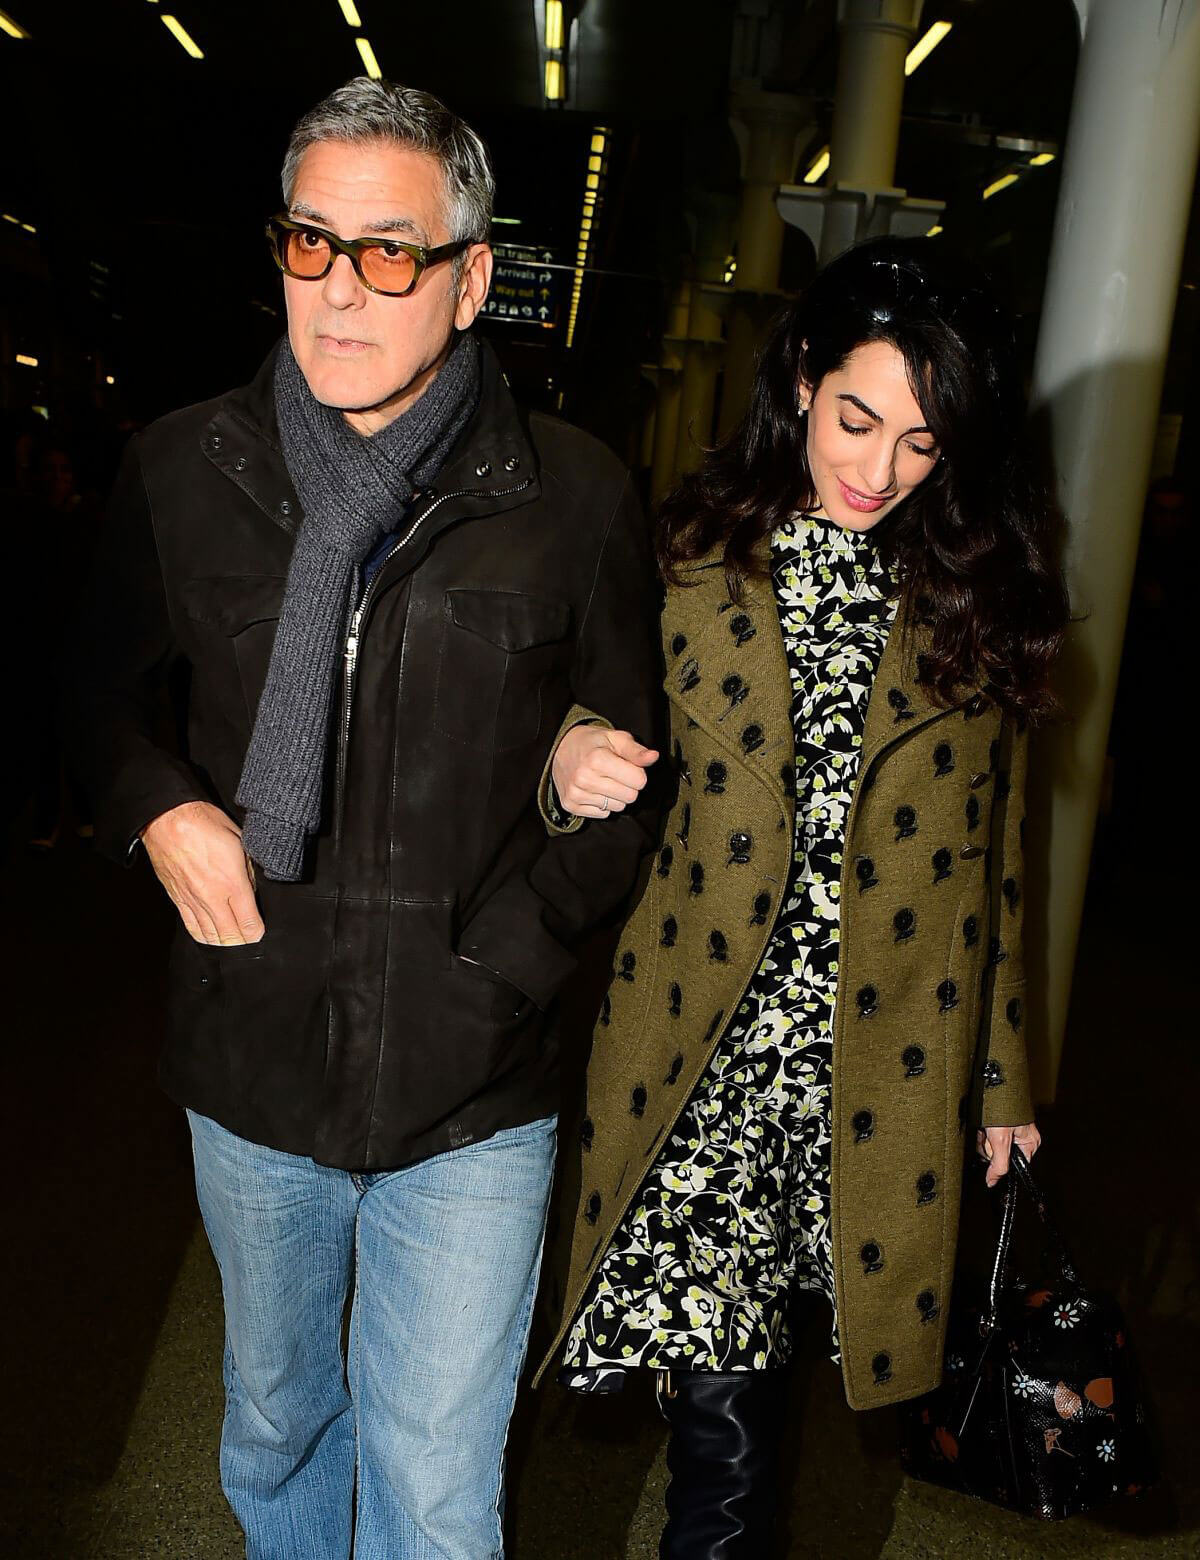 Amal Clooney and George Clooney at St Pancras Eurostar in London 11